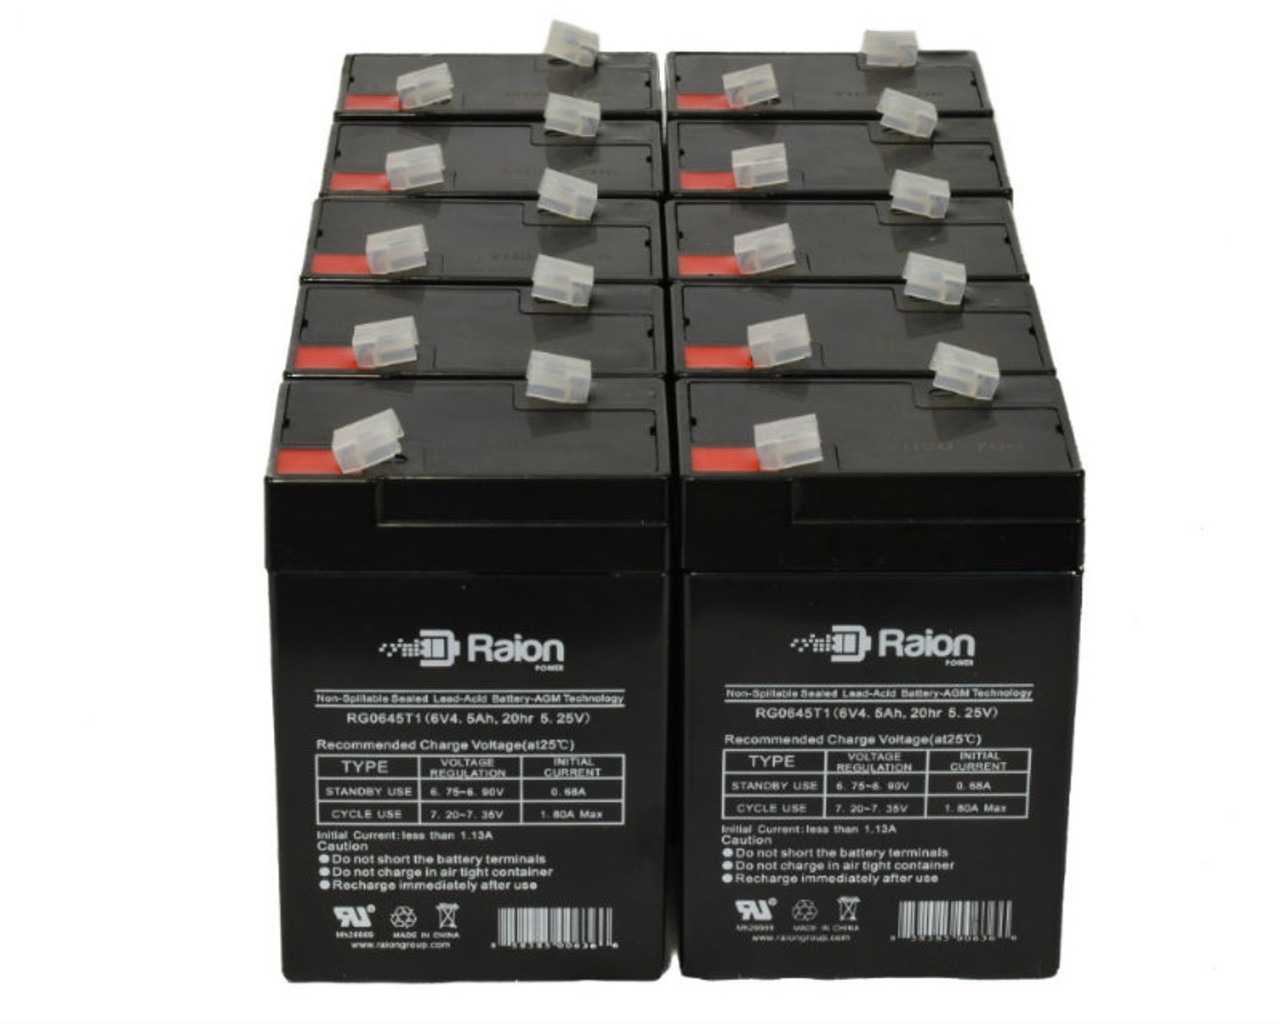 Raion Power 6 Volt 4.5Ah RG0645T1 Replacement Battery for ROBITON VRLA6-4.5 - 10 Pack